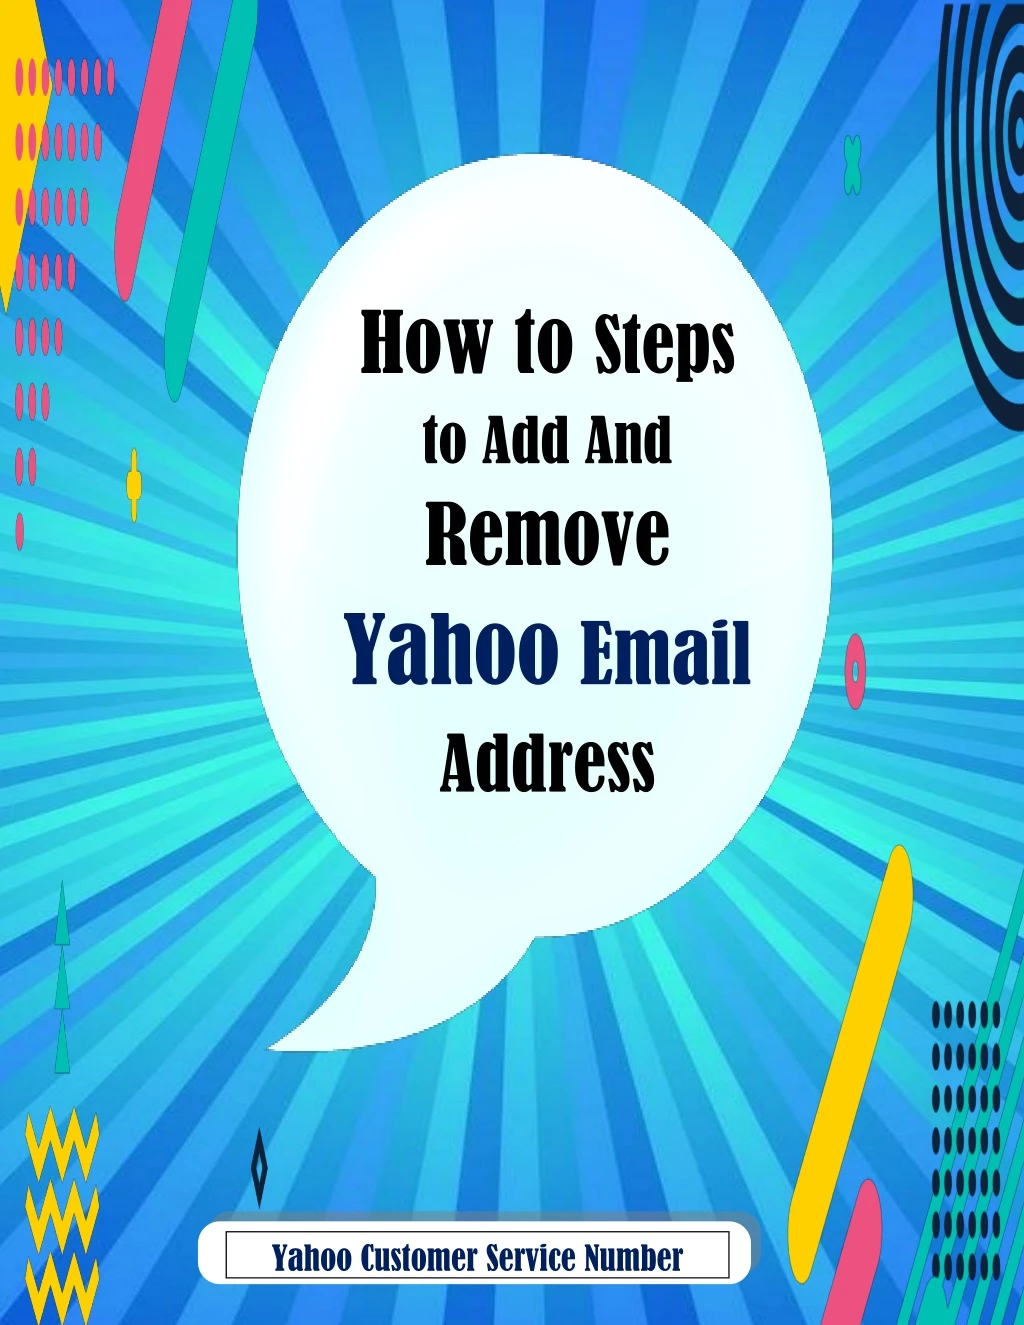 how to steps to add and remove yahoo email address